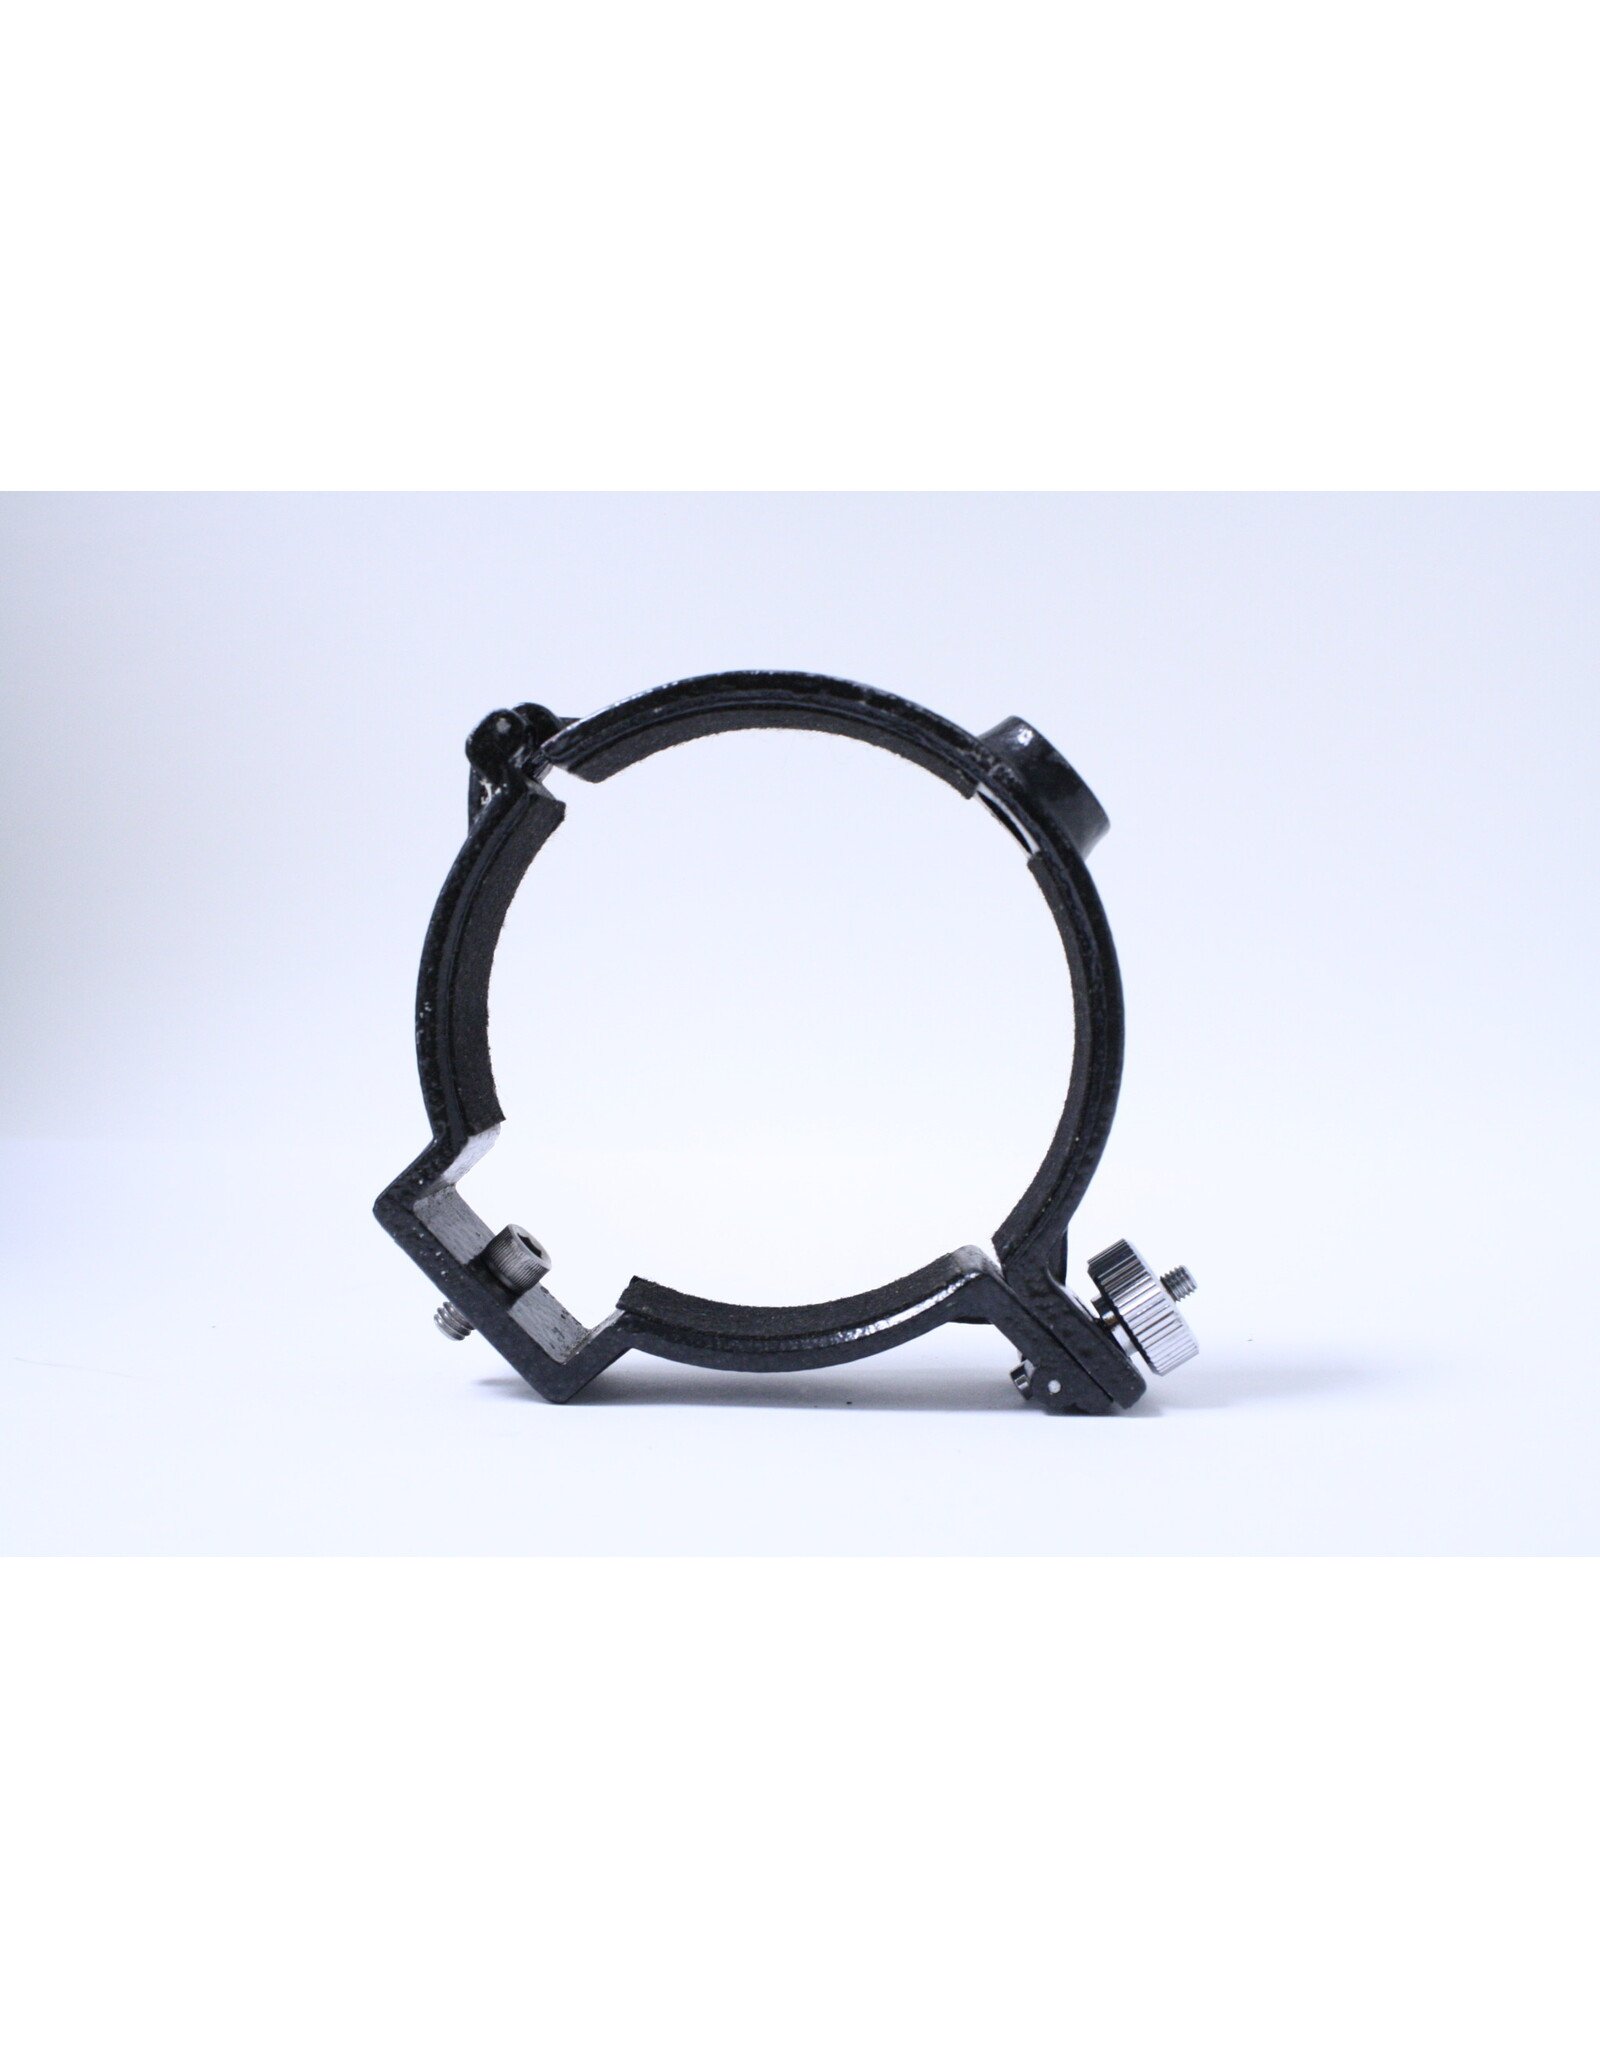 Antares Optical Antares Telescope Tube Mounting Rings - 3.5" (90mm) (Set of 2) (Pre-owned)